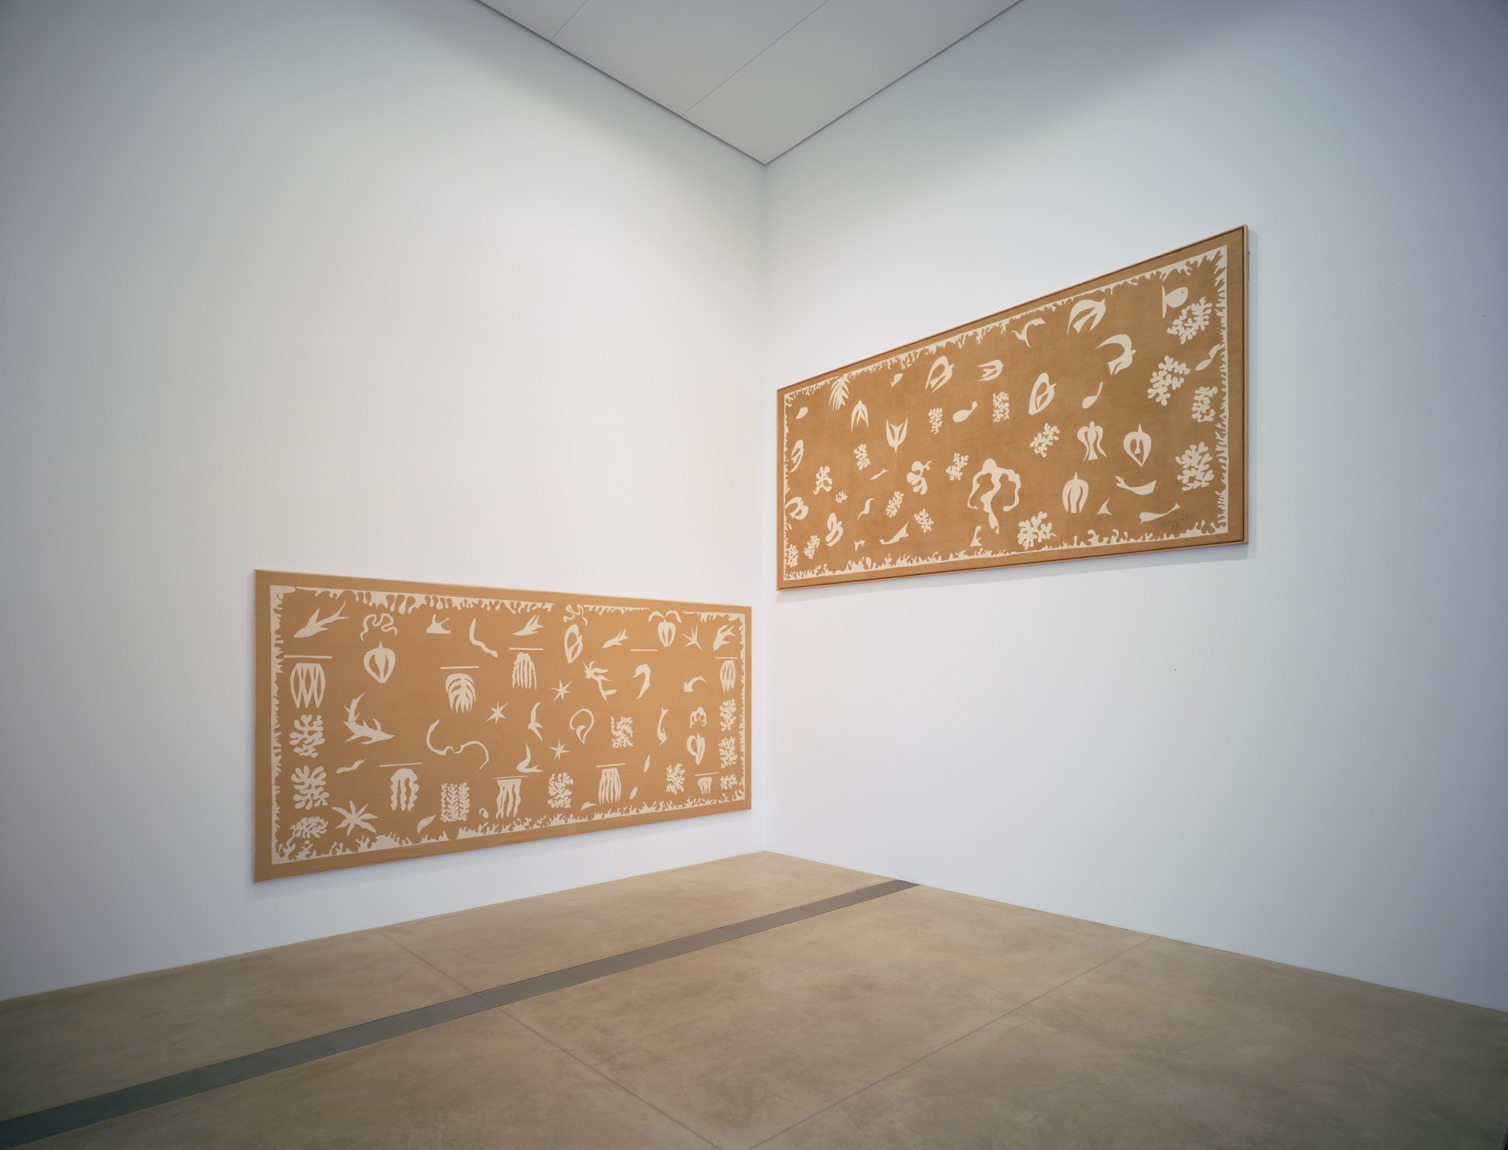 Two Matisse large, wide tan panels decorated with white designs titled "Oceania, the Sea" and "Oceania, the Sky" are each installed on a wall in the Cube Gallery.